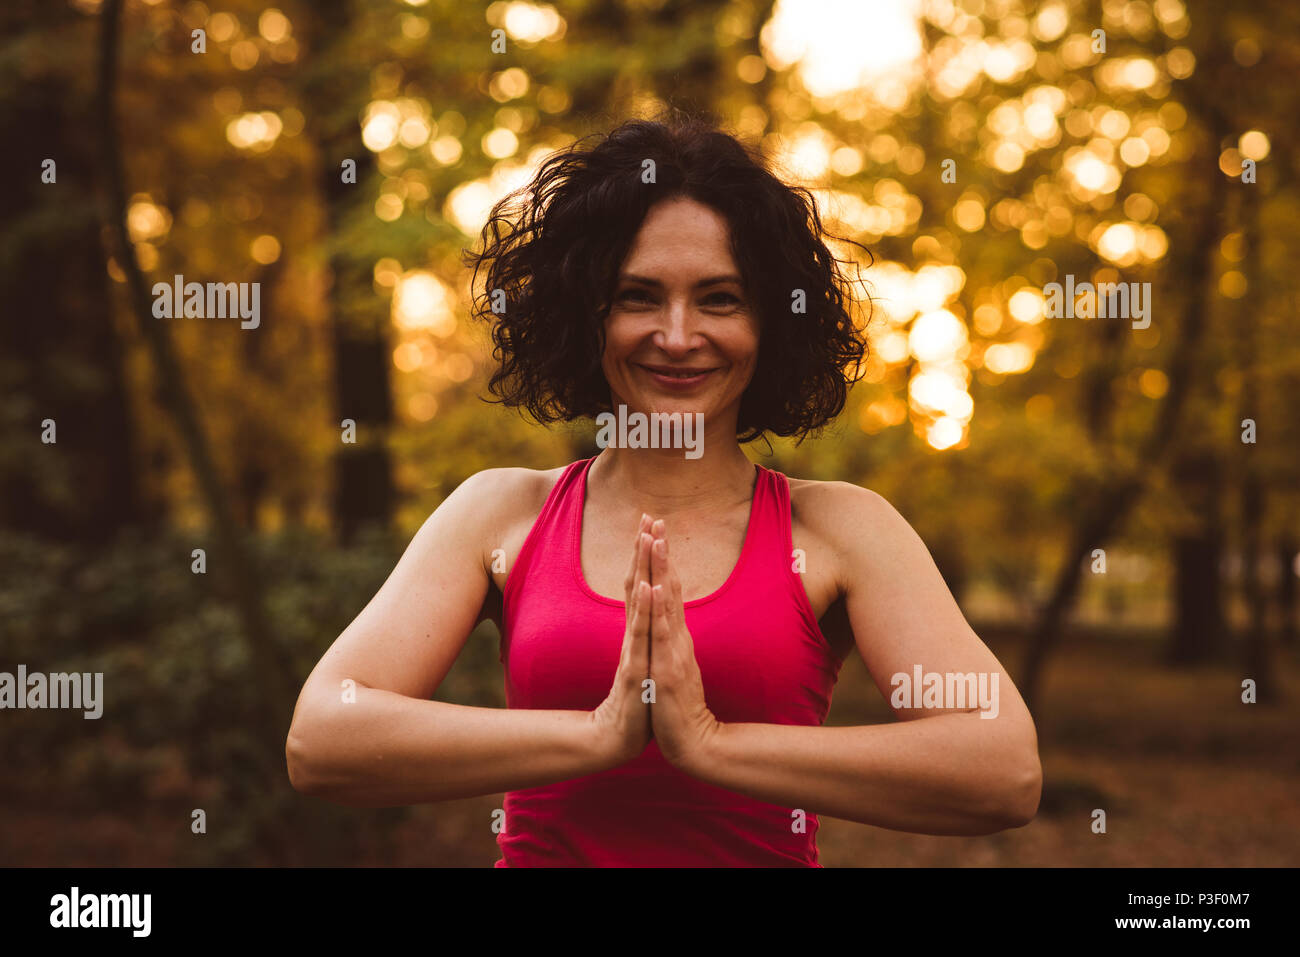 Women meditating in a forest Stock Photo